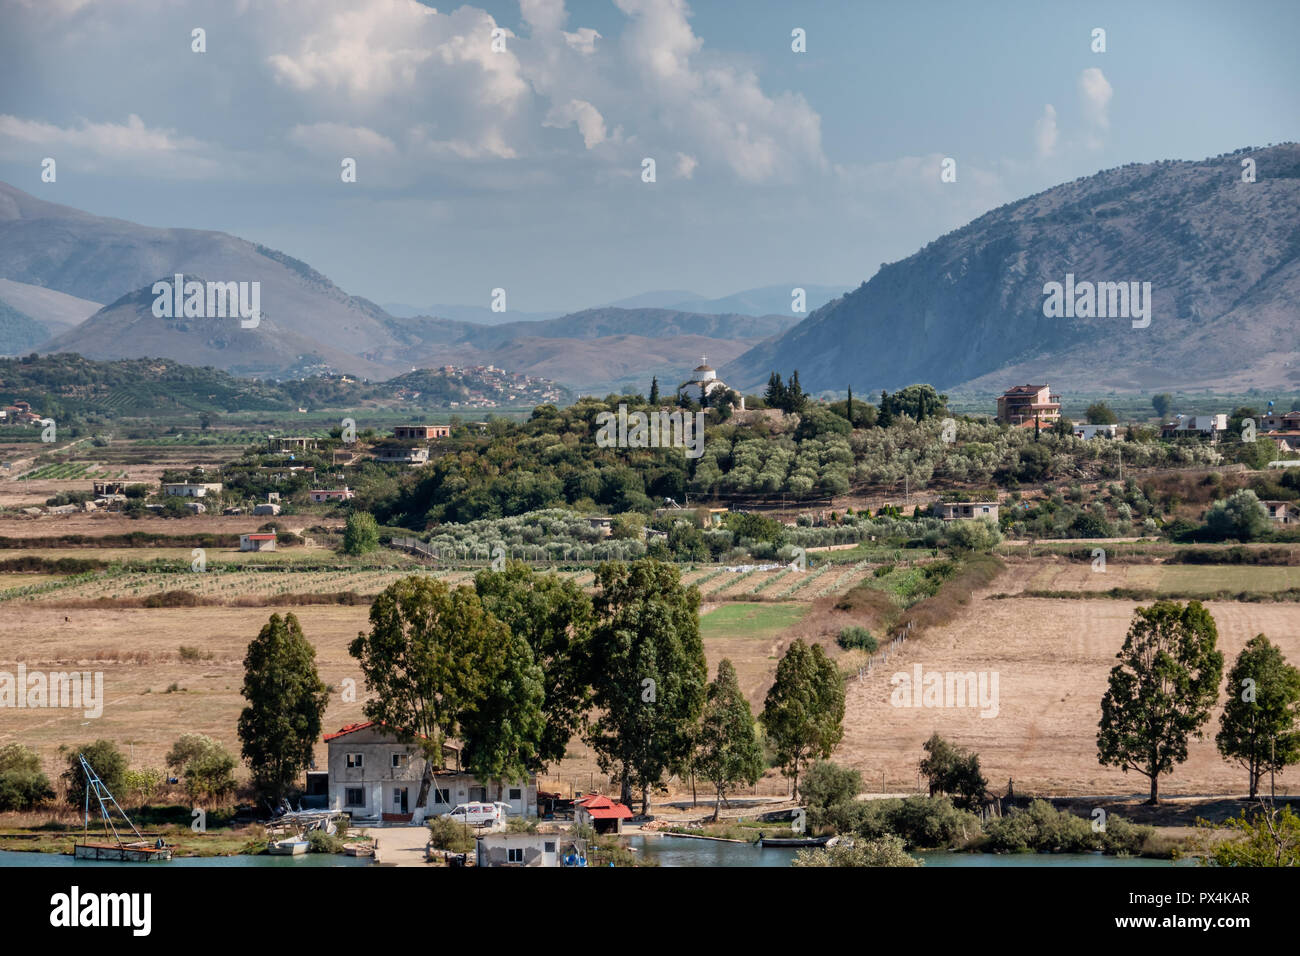 Landscape from top of Butrint ancient city, Albania Stock Photo